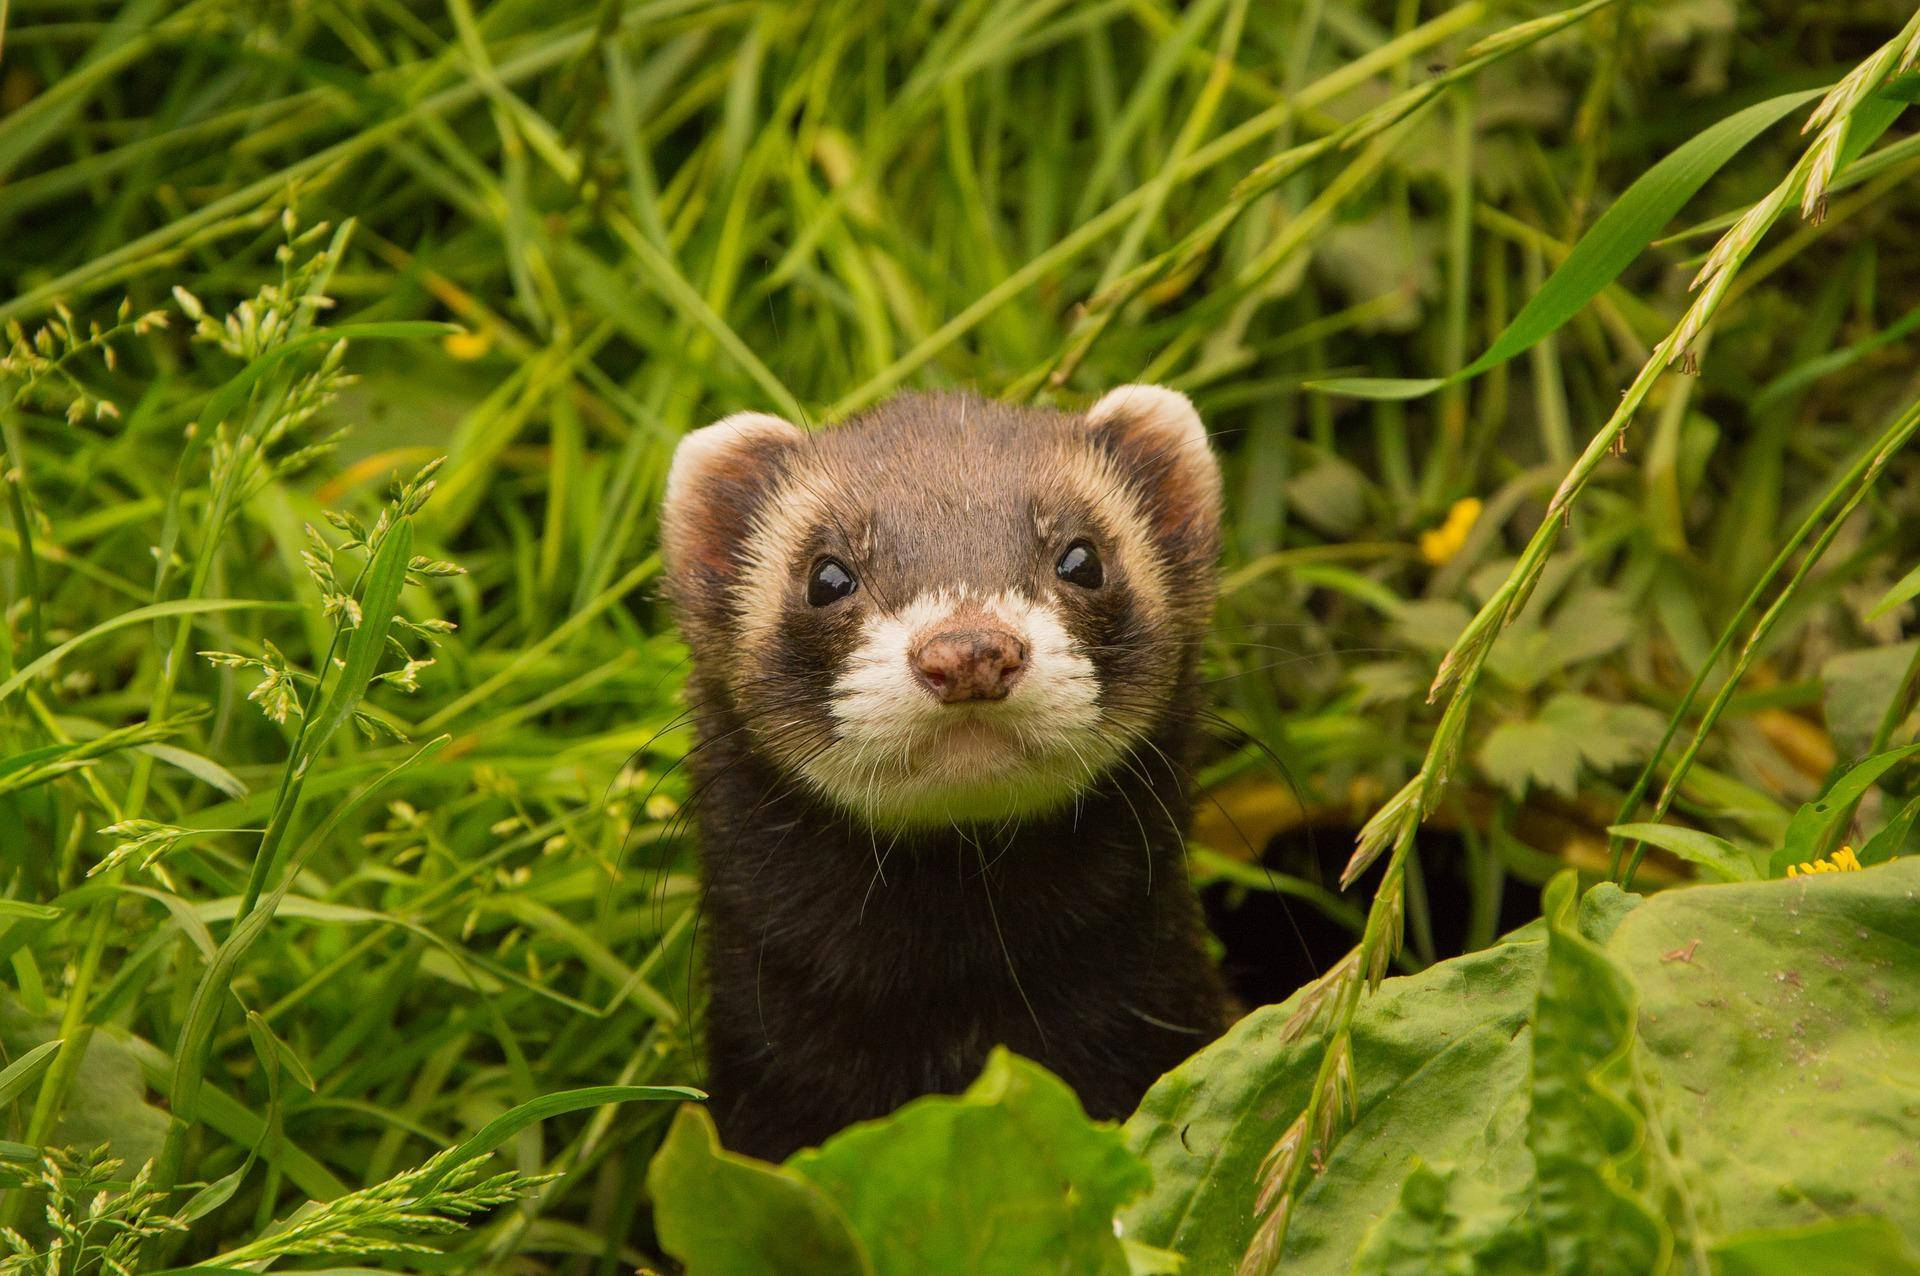 A Curious Ferret In The Green Outdoors